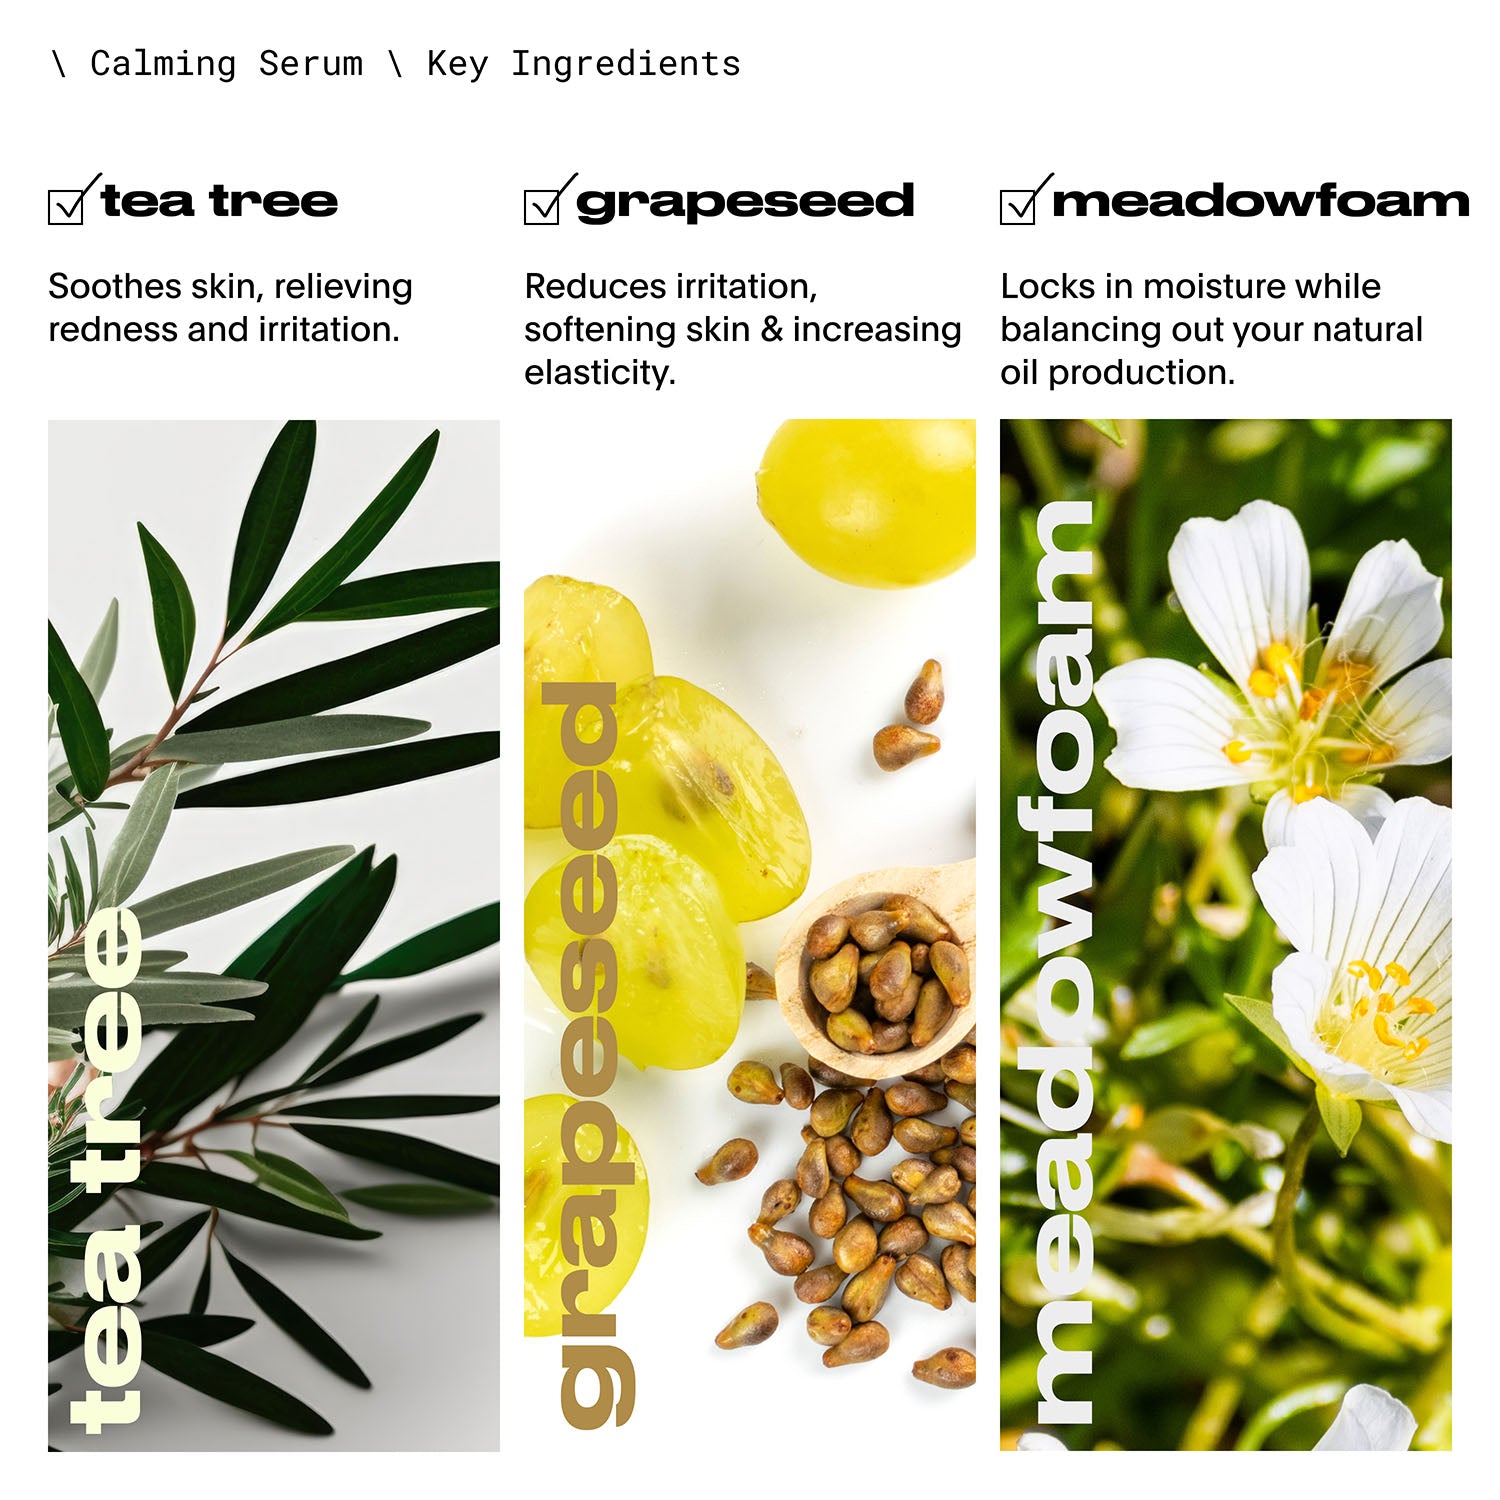 An infographic of Key Ingredients in Leaf Shave brand Calming Serum: 1) Tea Tree soothes skin, relieving redness and irritation; 2) Grapeseed reduces irritation, softening skin and increasing elasticity; 3) Meadowfoam locks in moisture while balancing out natural oil production. It features images of the plants associated with those three ingredients. 